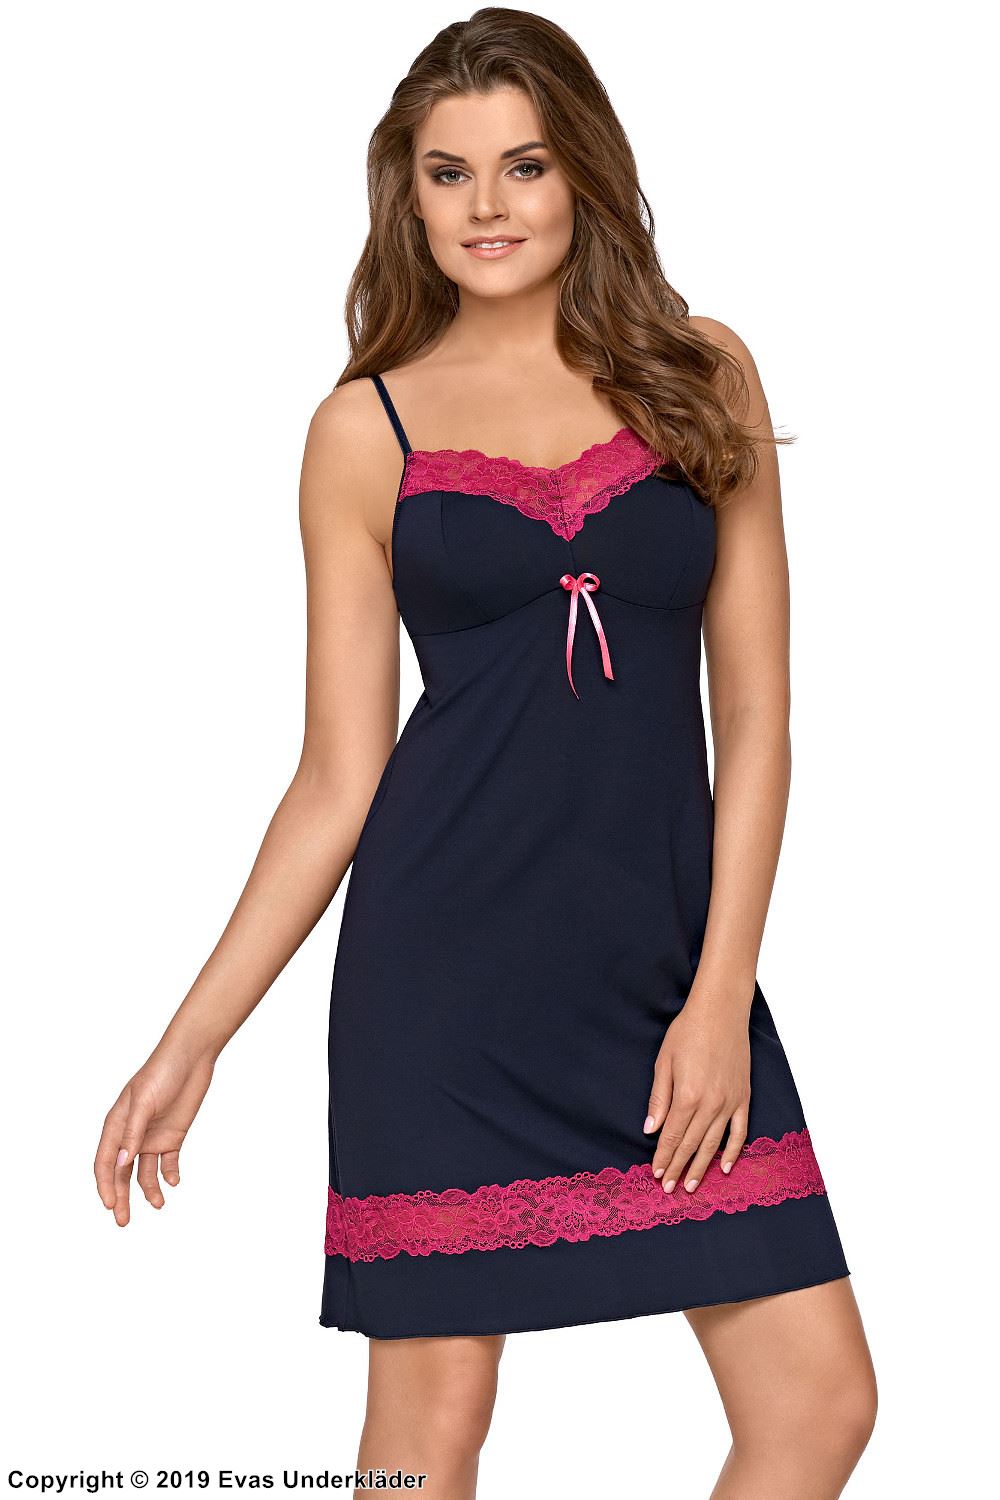 Nightie, lace, bow, thin shoulder straps